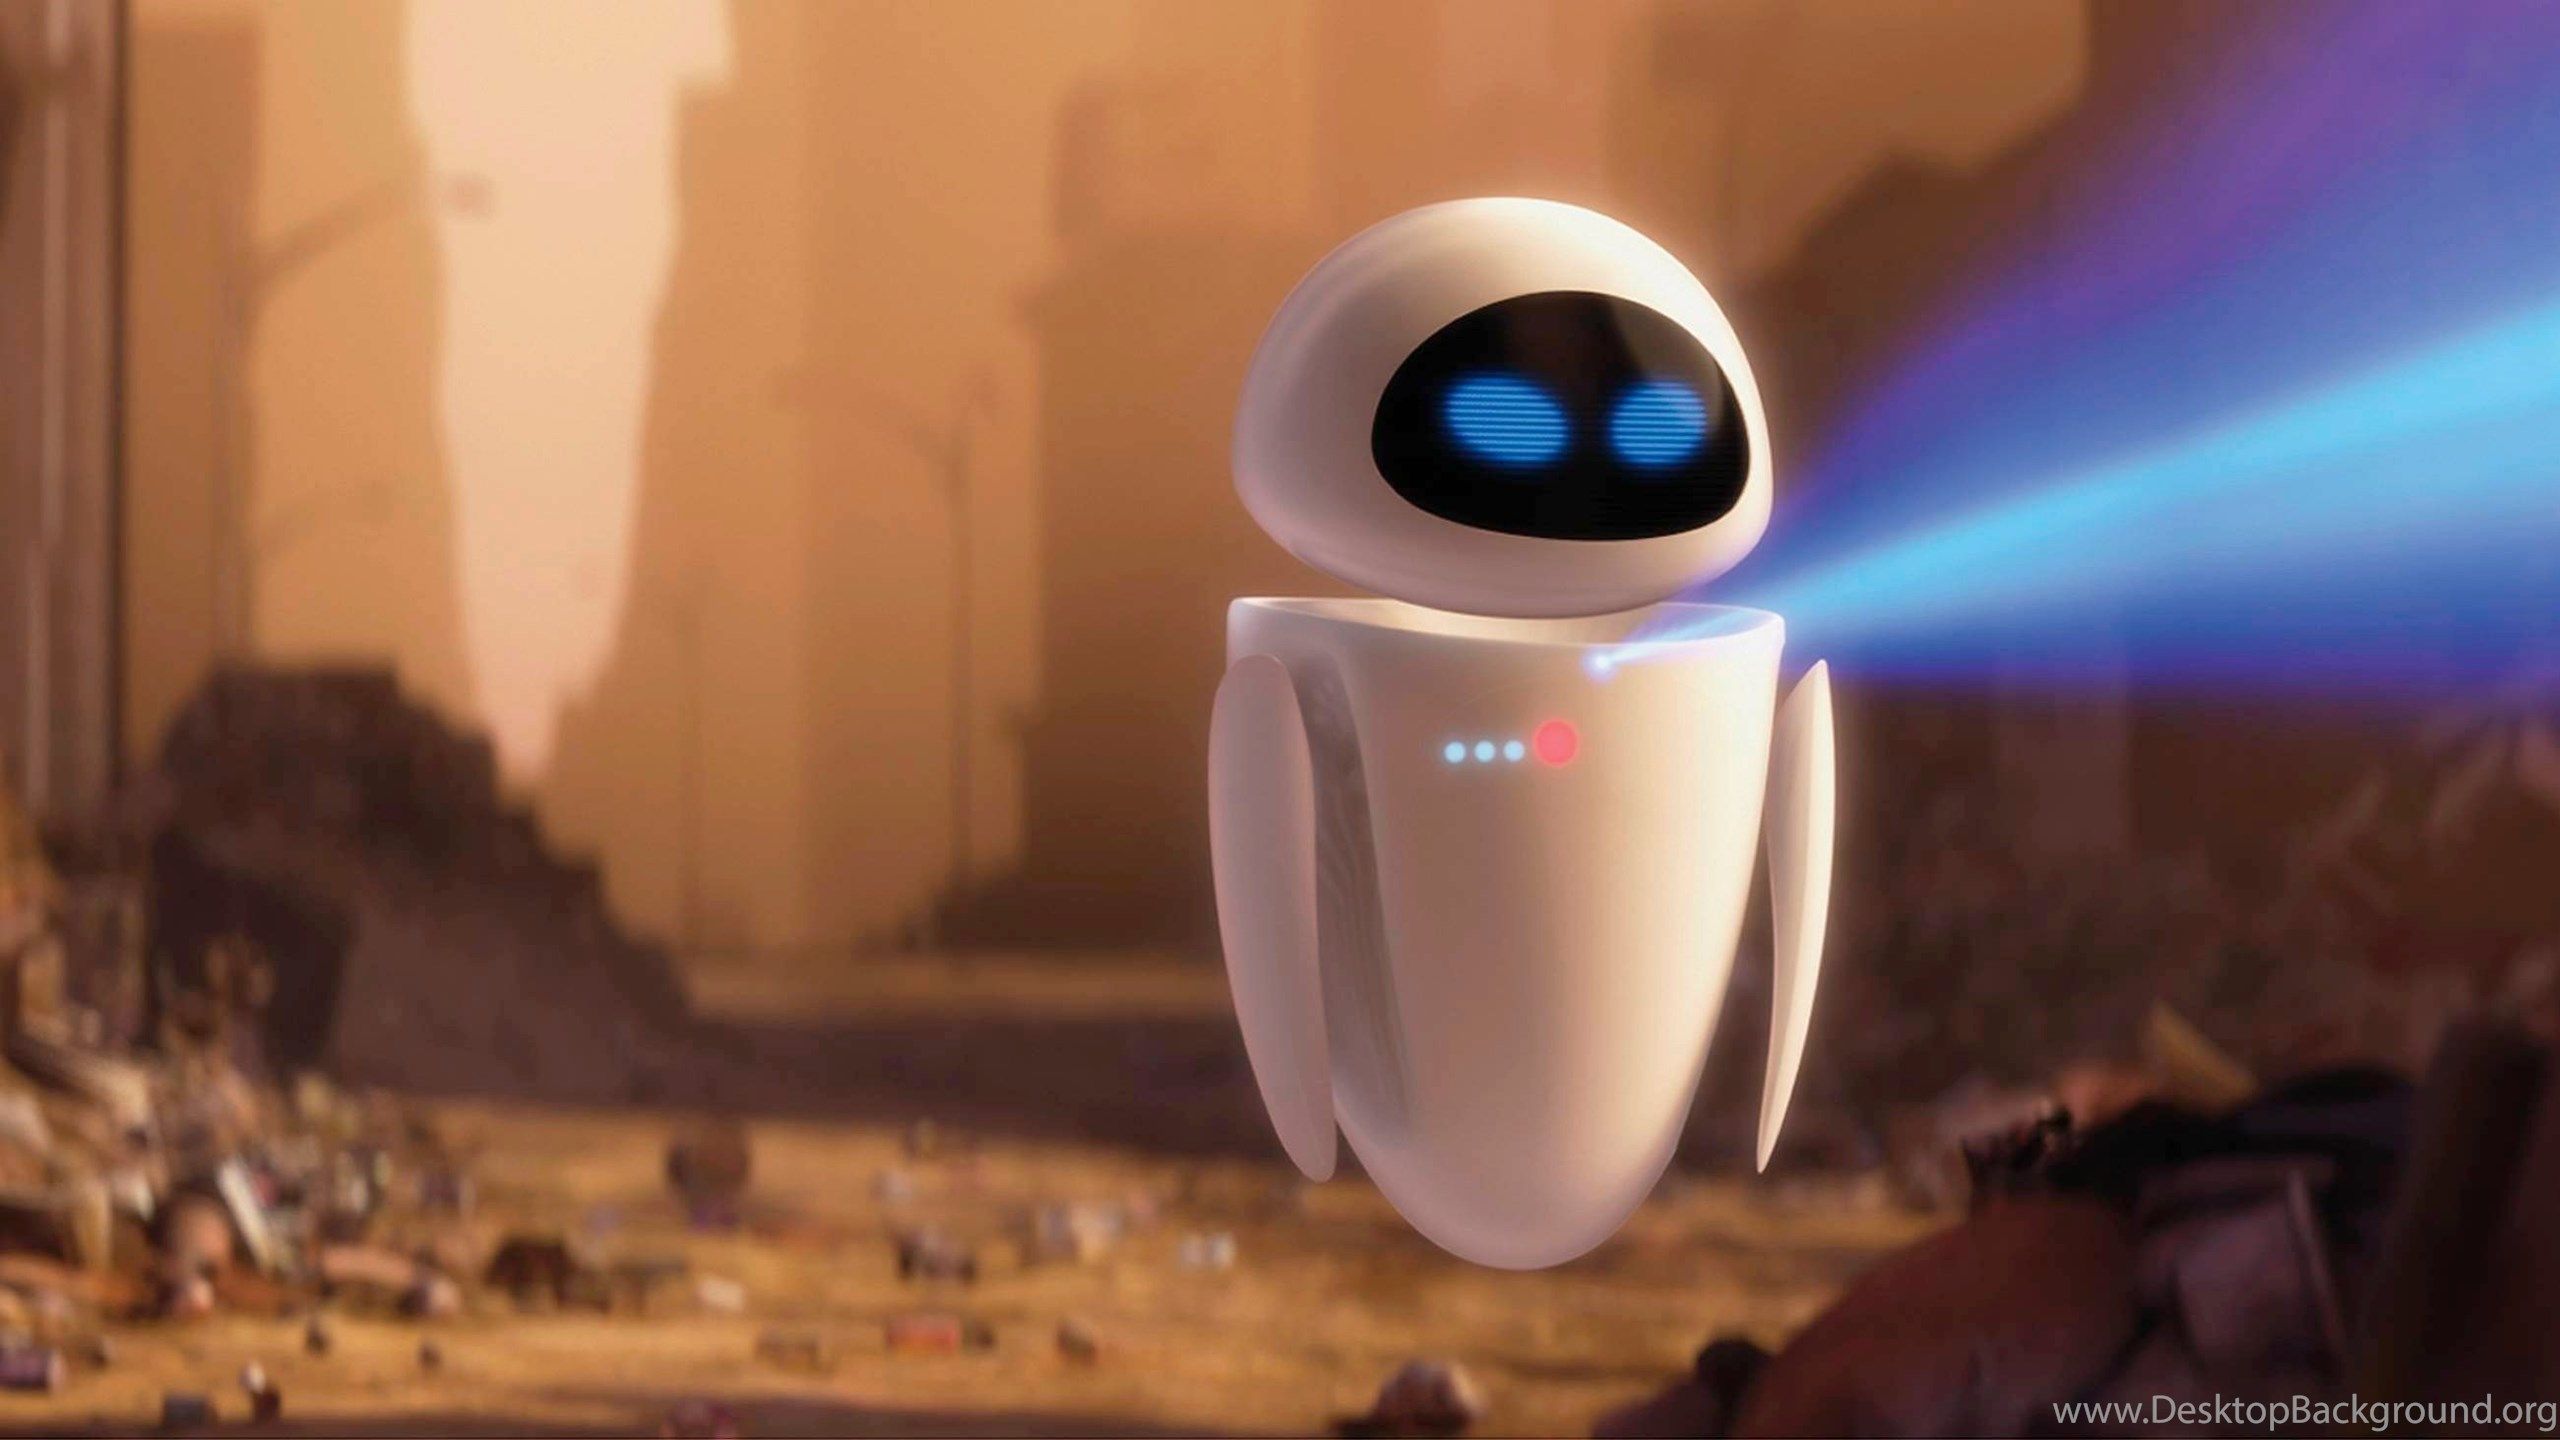 Download Wall E And Eve Wallpaper Wide .desktopbackground.org